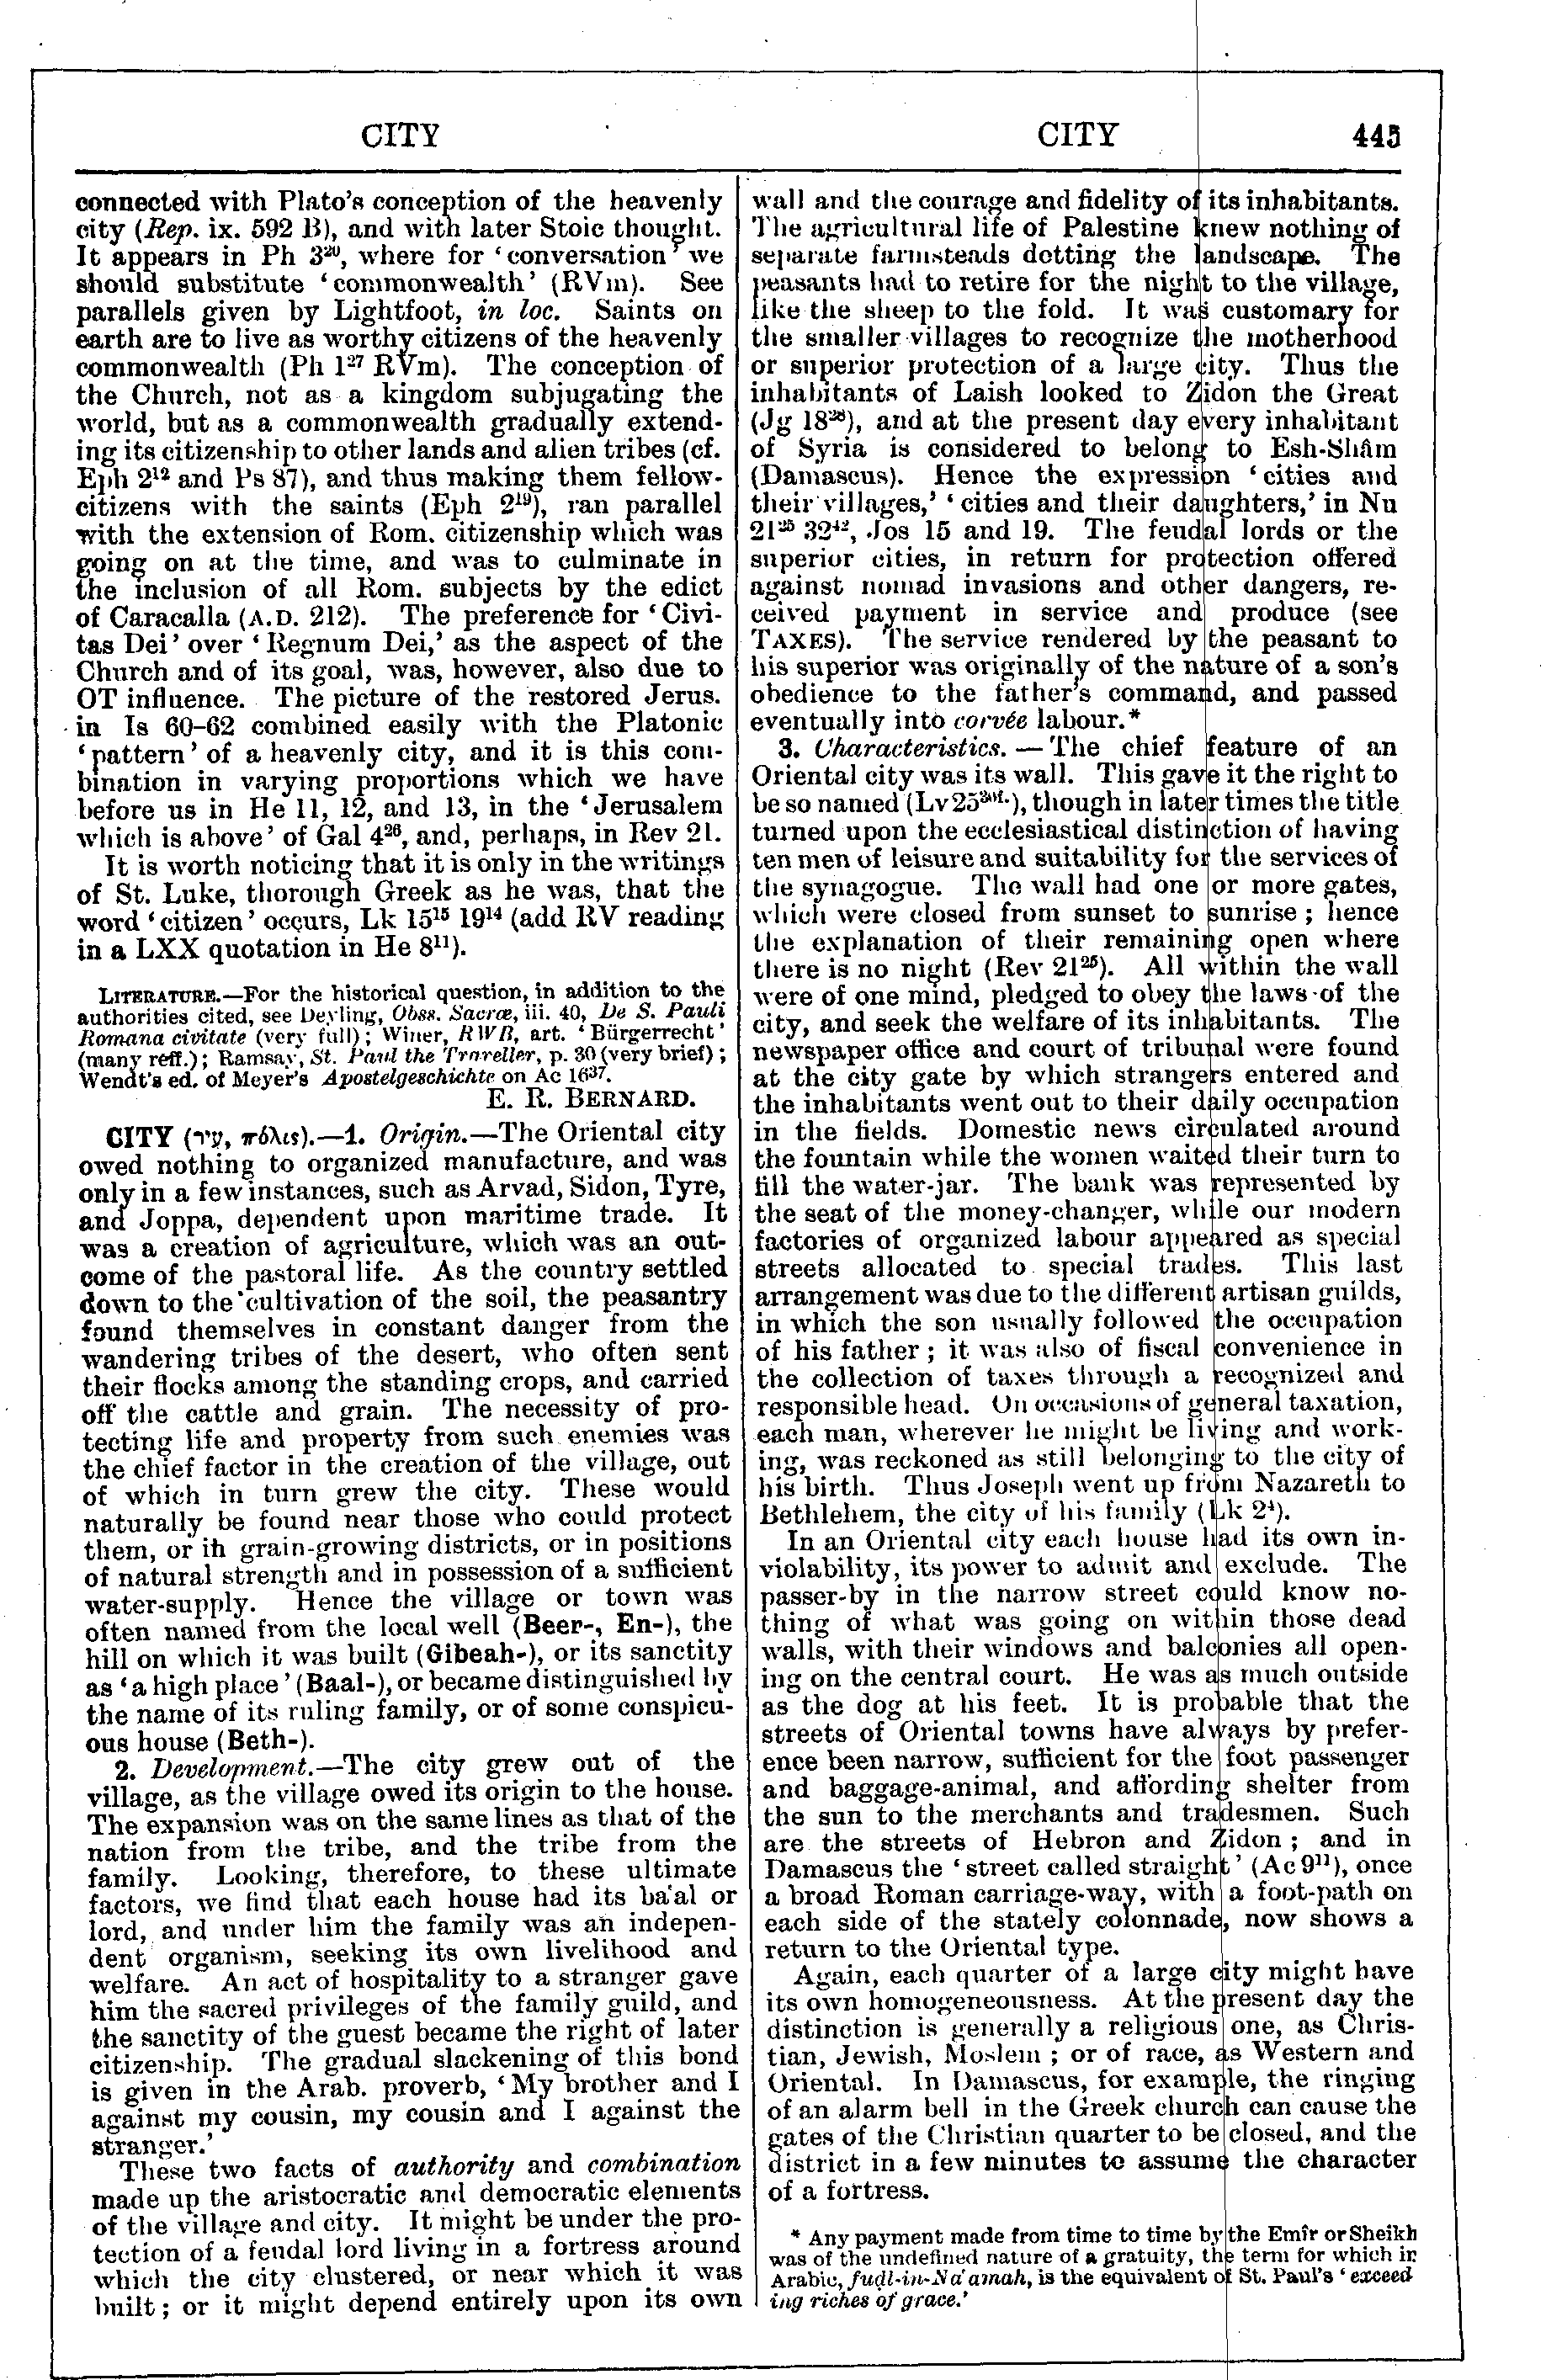 Image of page 445